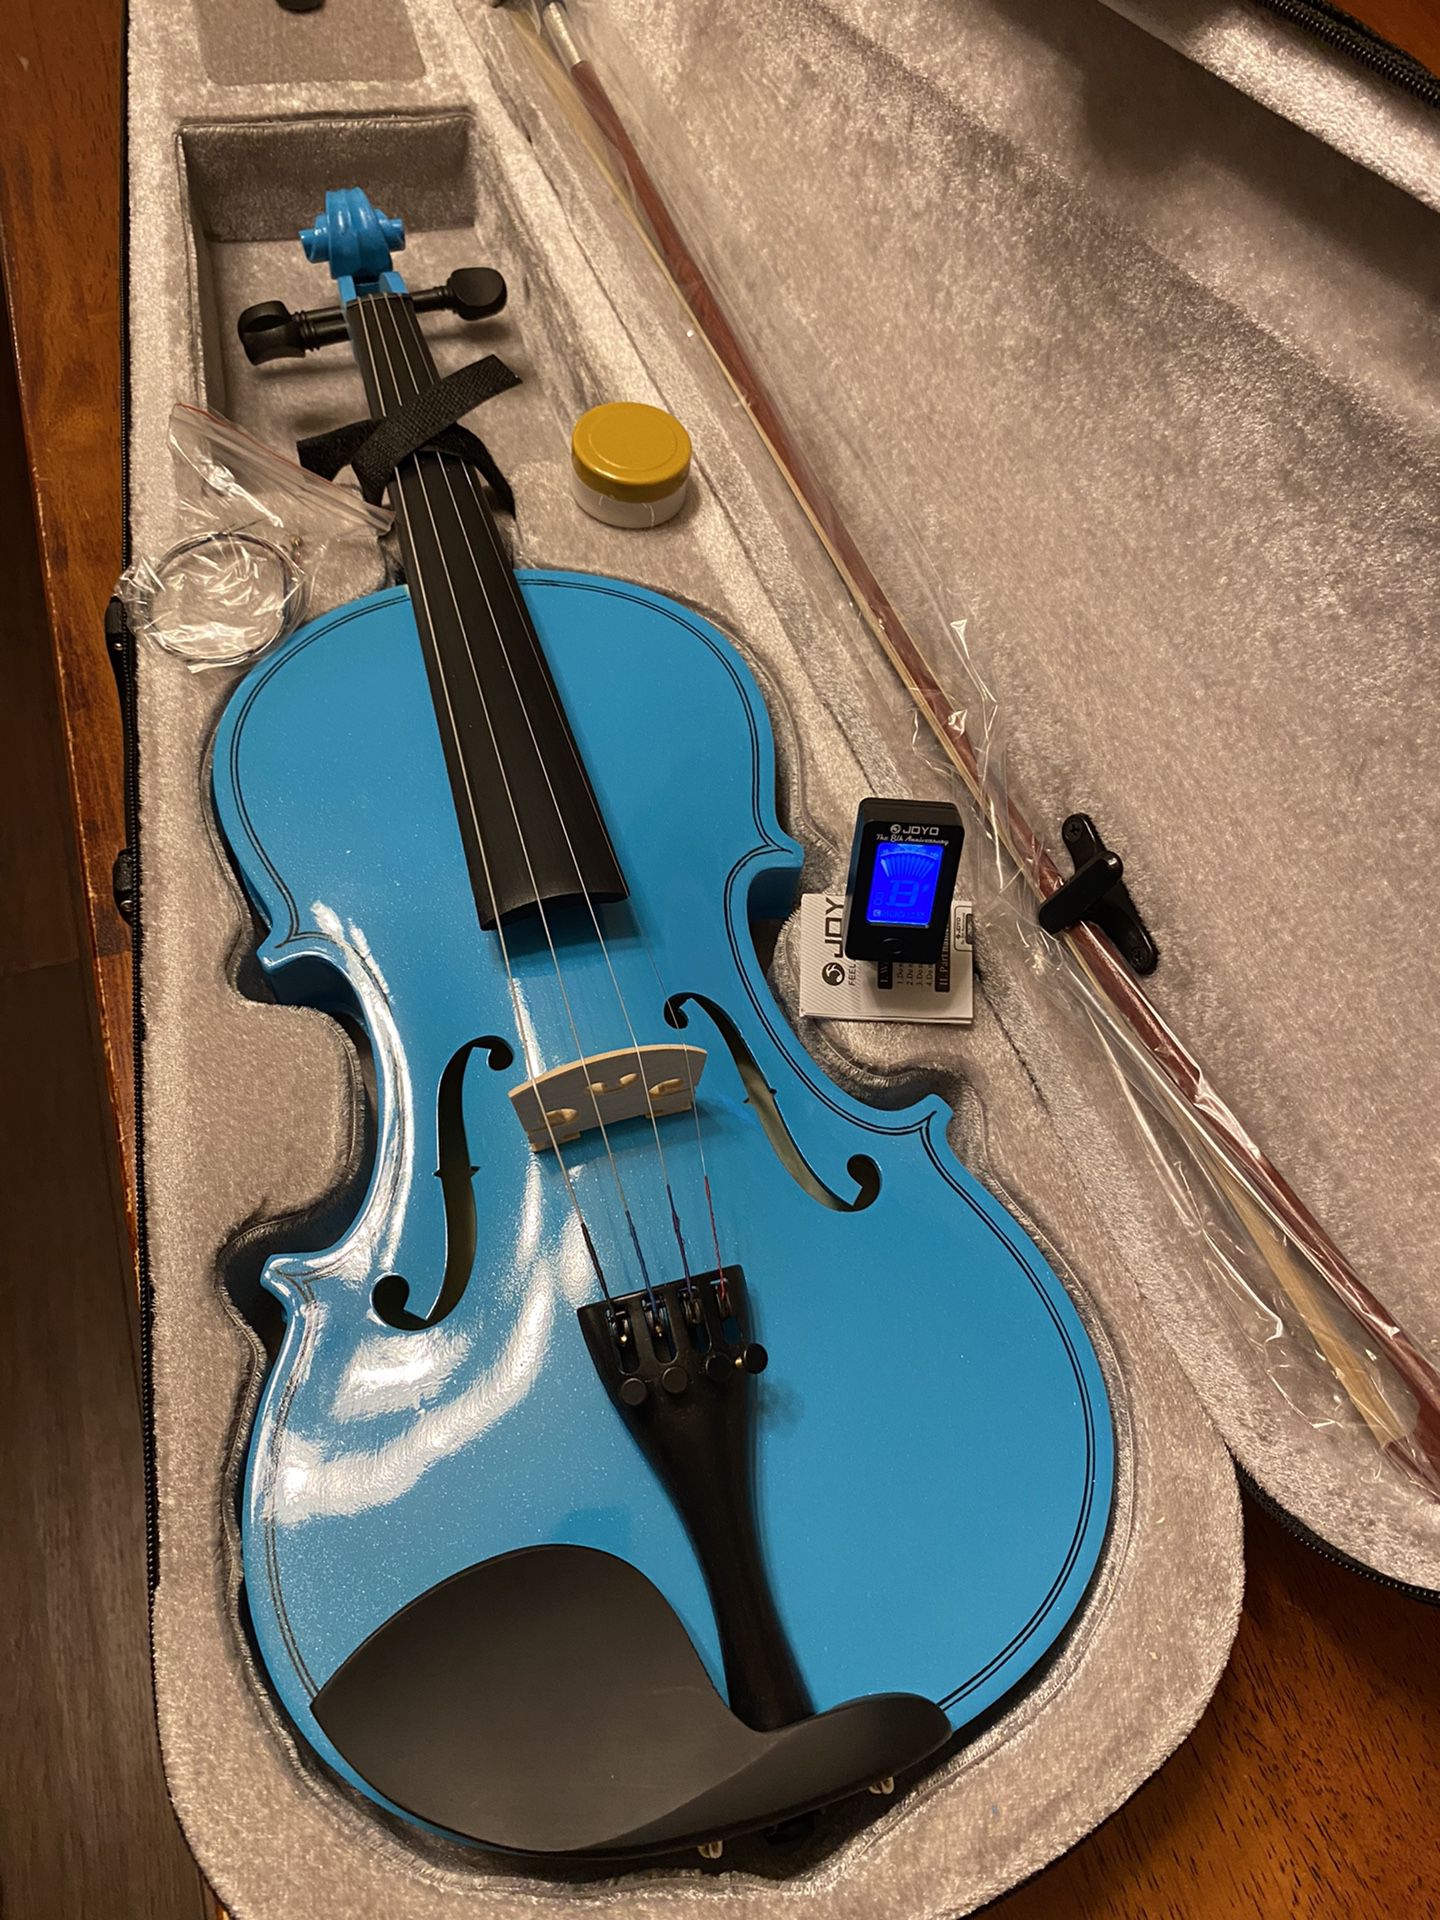 4/4 Full Size Blue Violin with New Bow, Digital Tuner, Extra Strings $100 Firm